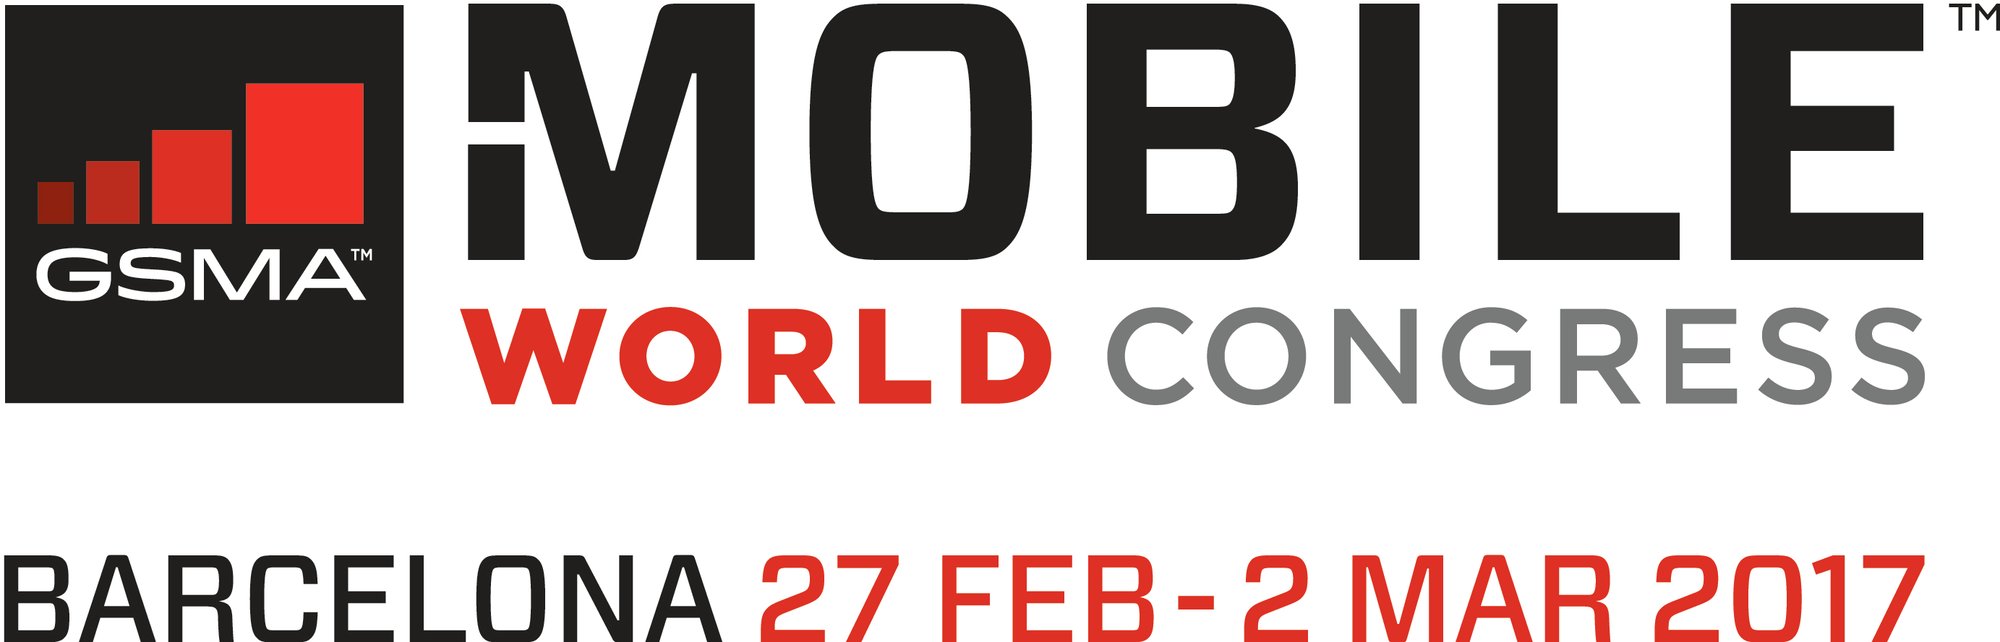 Zooma at #MWC17 in Barcelona February 25 to March 1